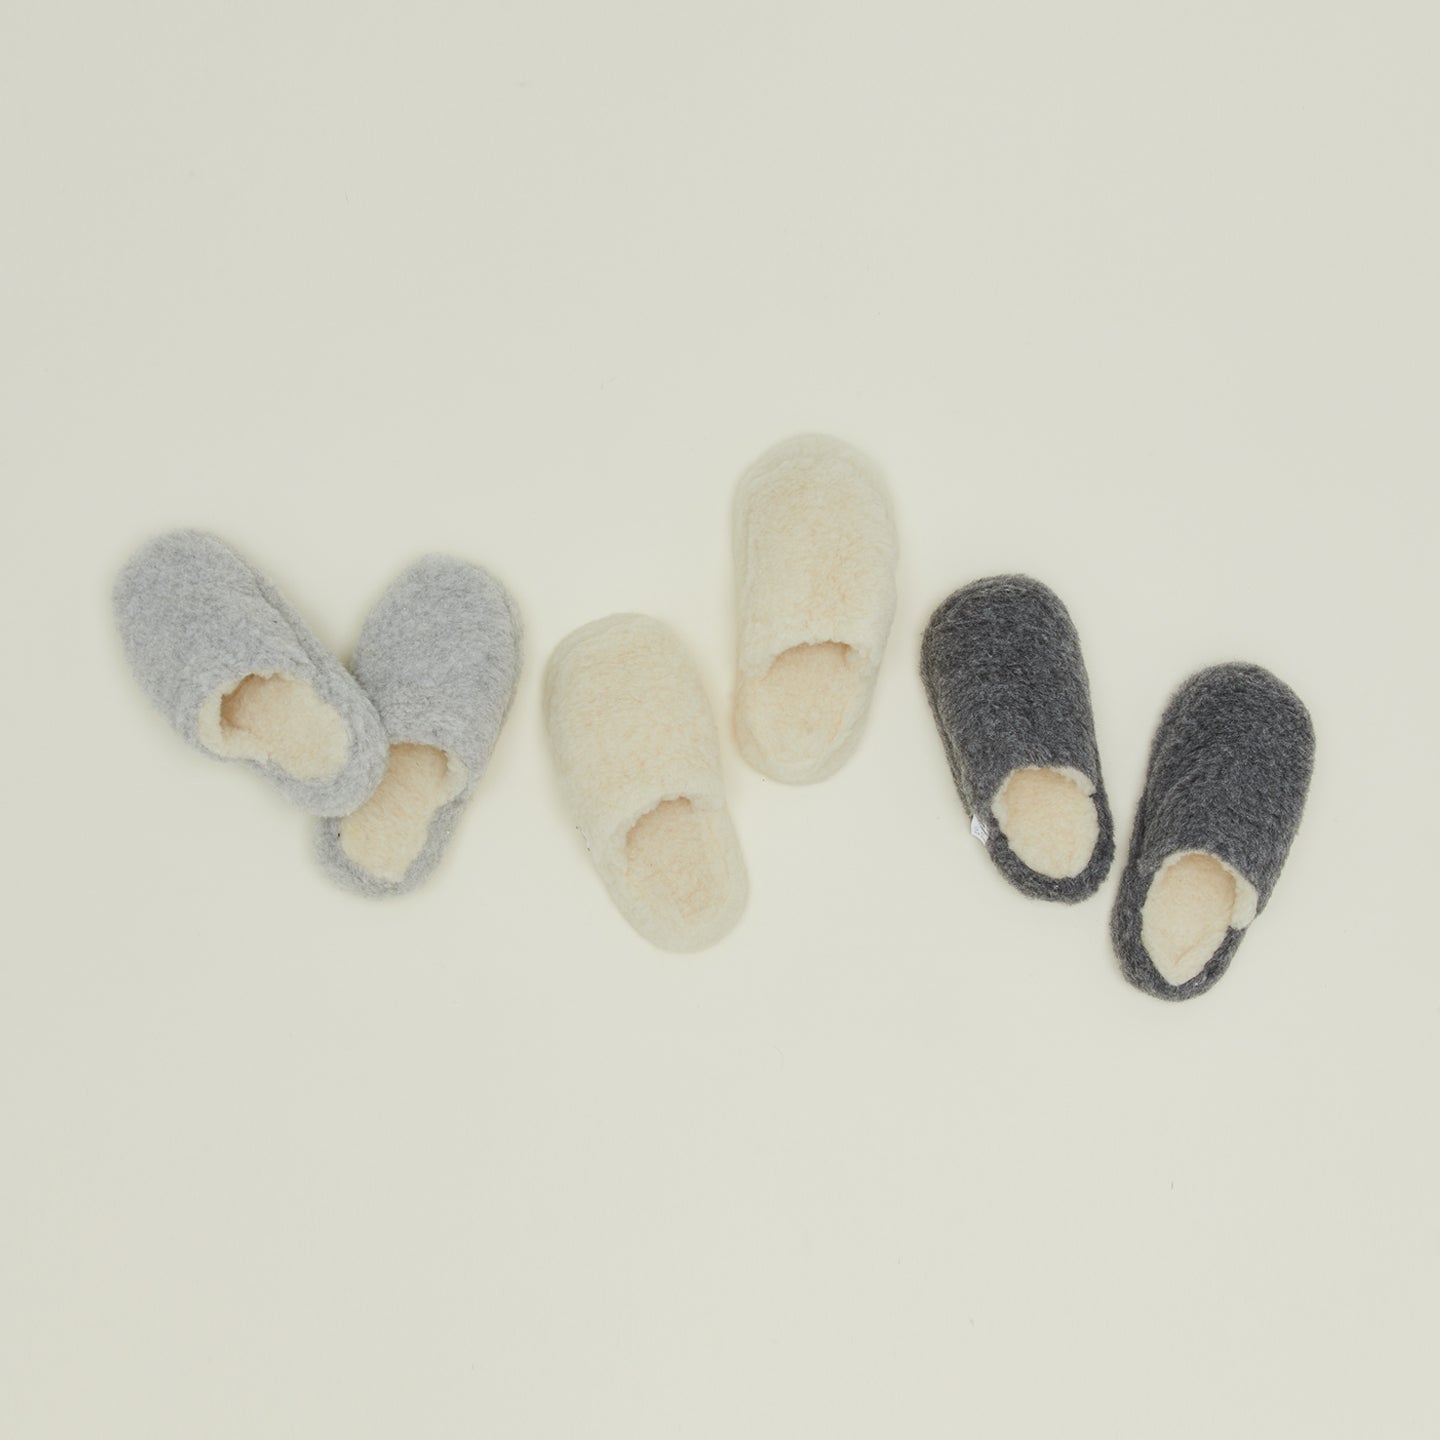 Fuzzy Wool Slippers - White